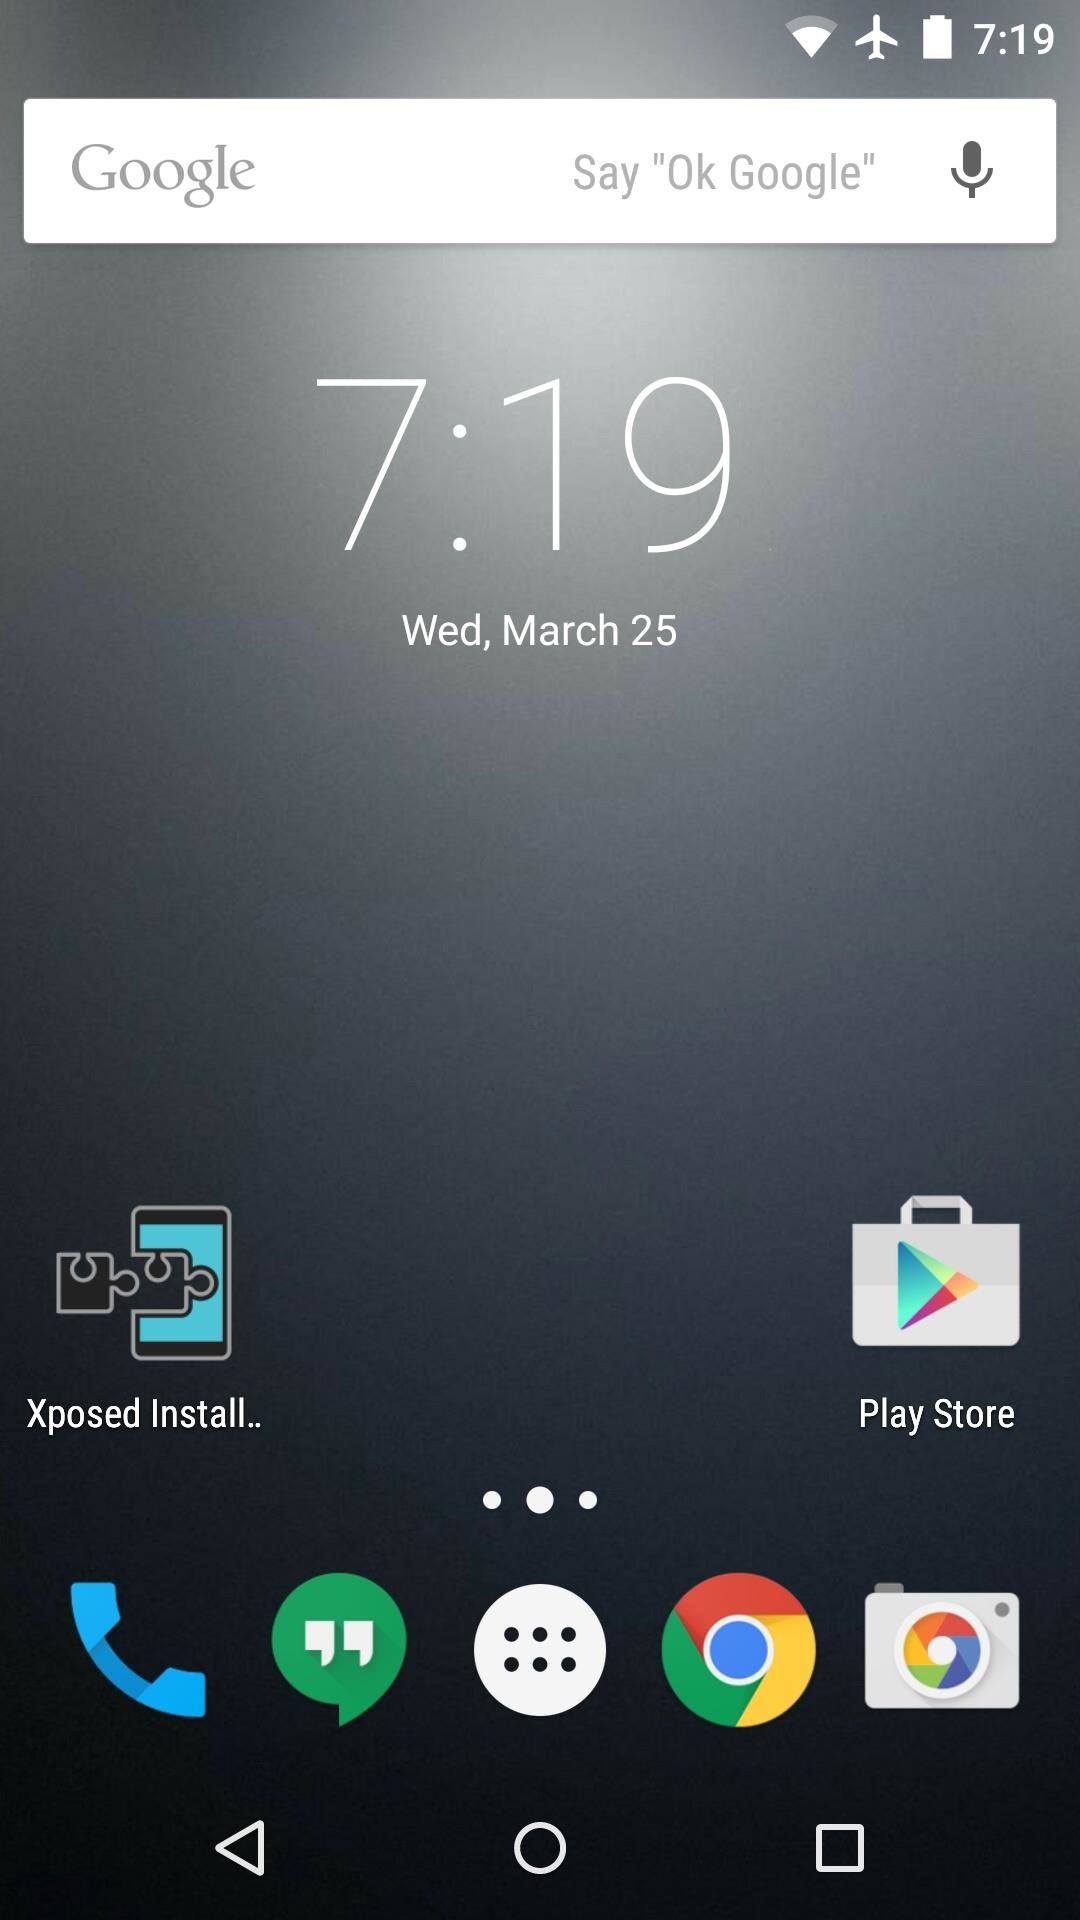 How to Change the Color of Android's Clock Widget